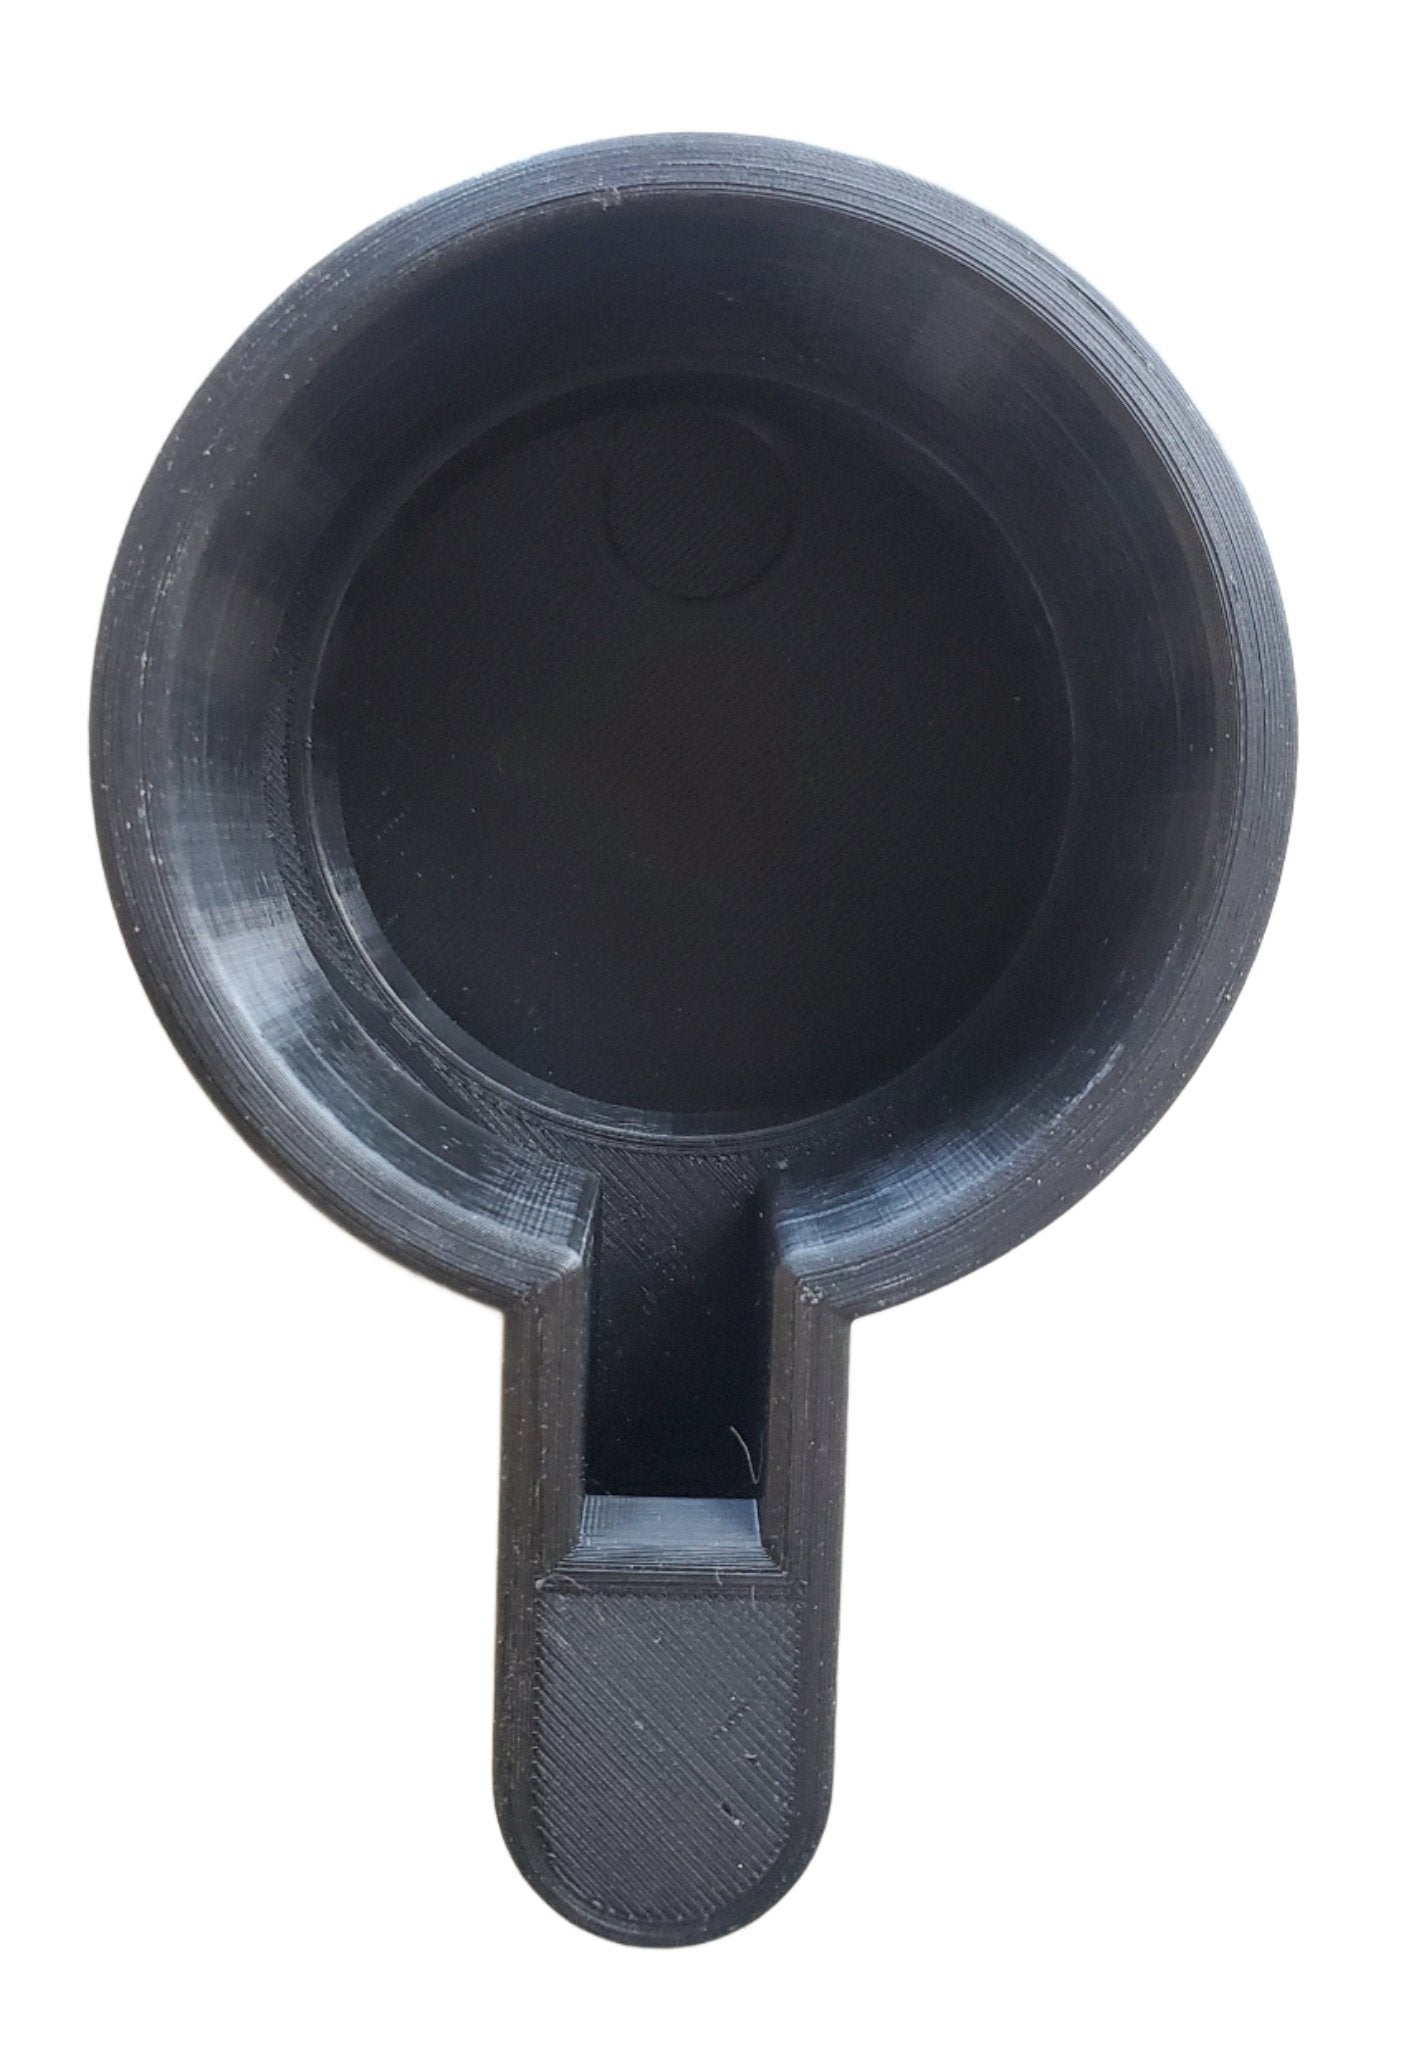 Exhaust Cap Cover (To Help Protect Cover) - Hunsaker Vortex Smokers